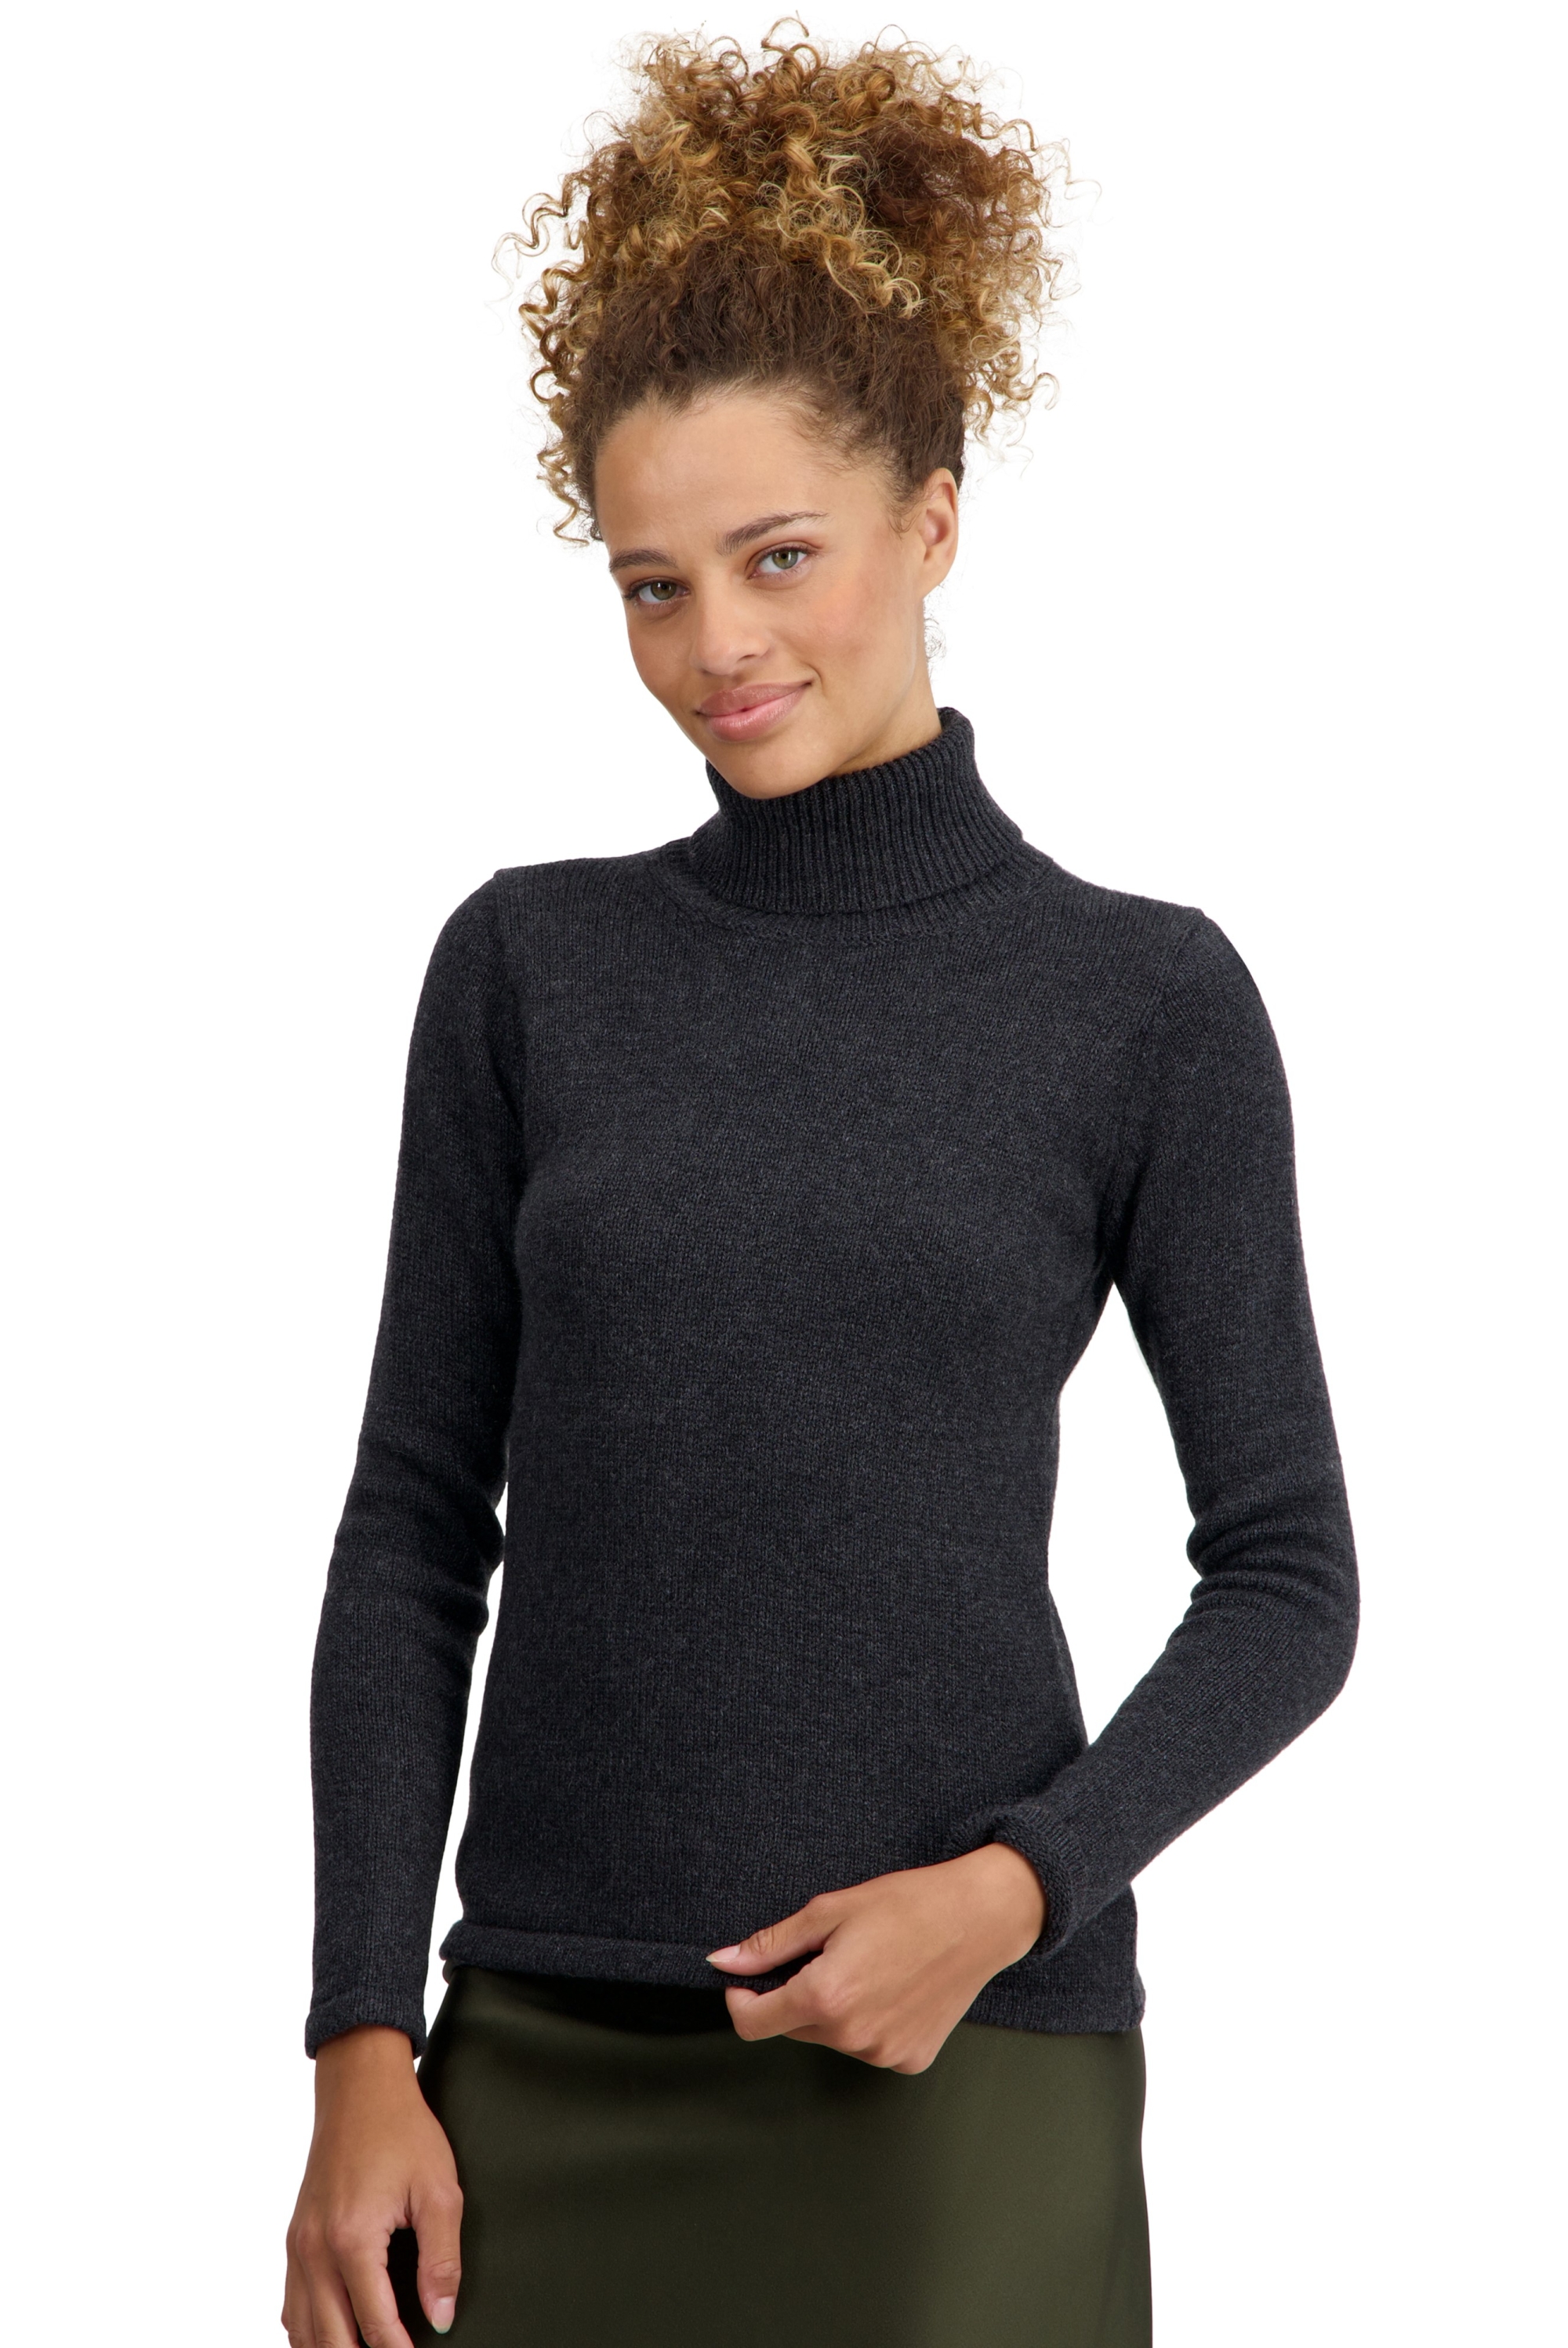 Cashmere ladies basic sweaters at low prices taipei first matt charcoal s